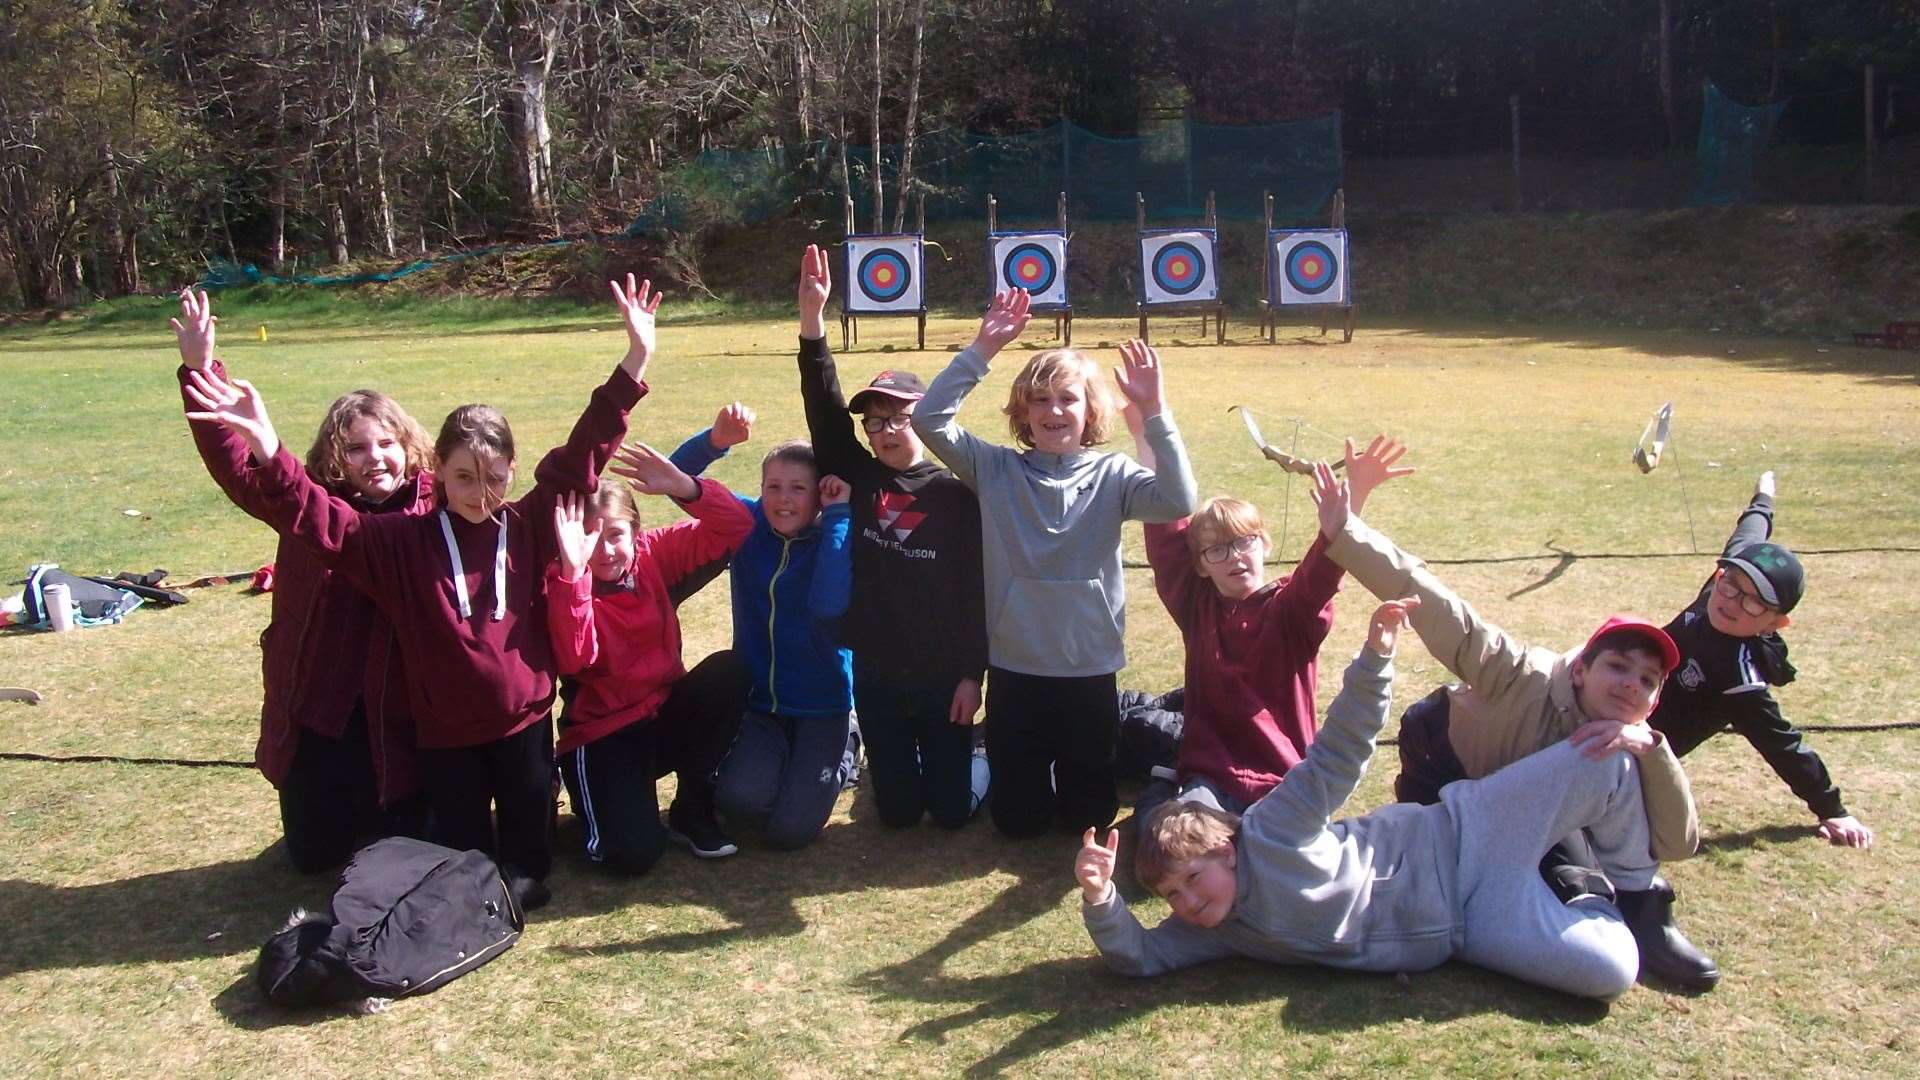 On target for archery practice.